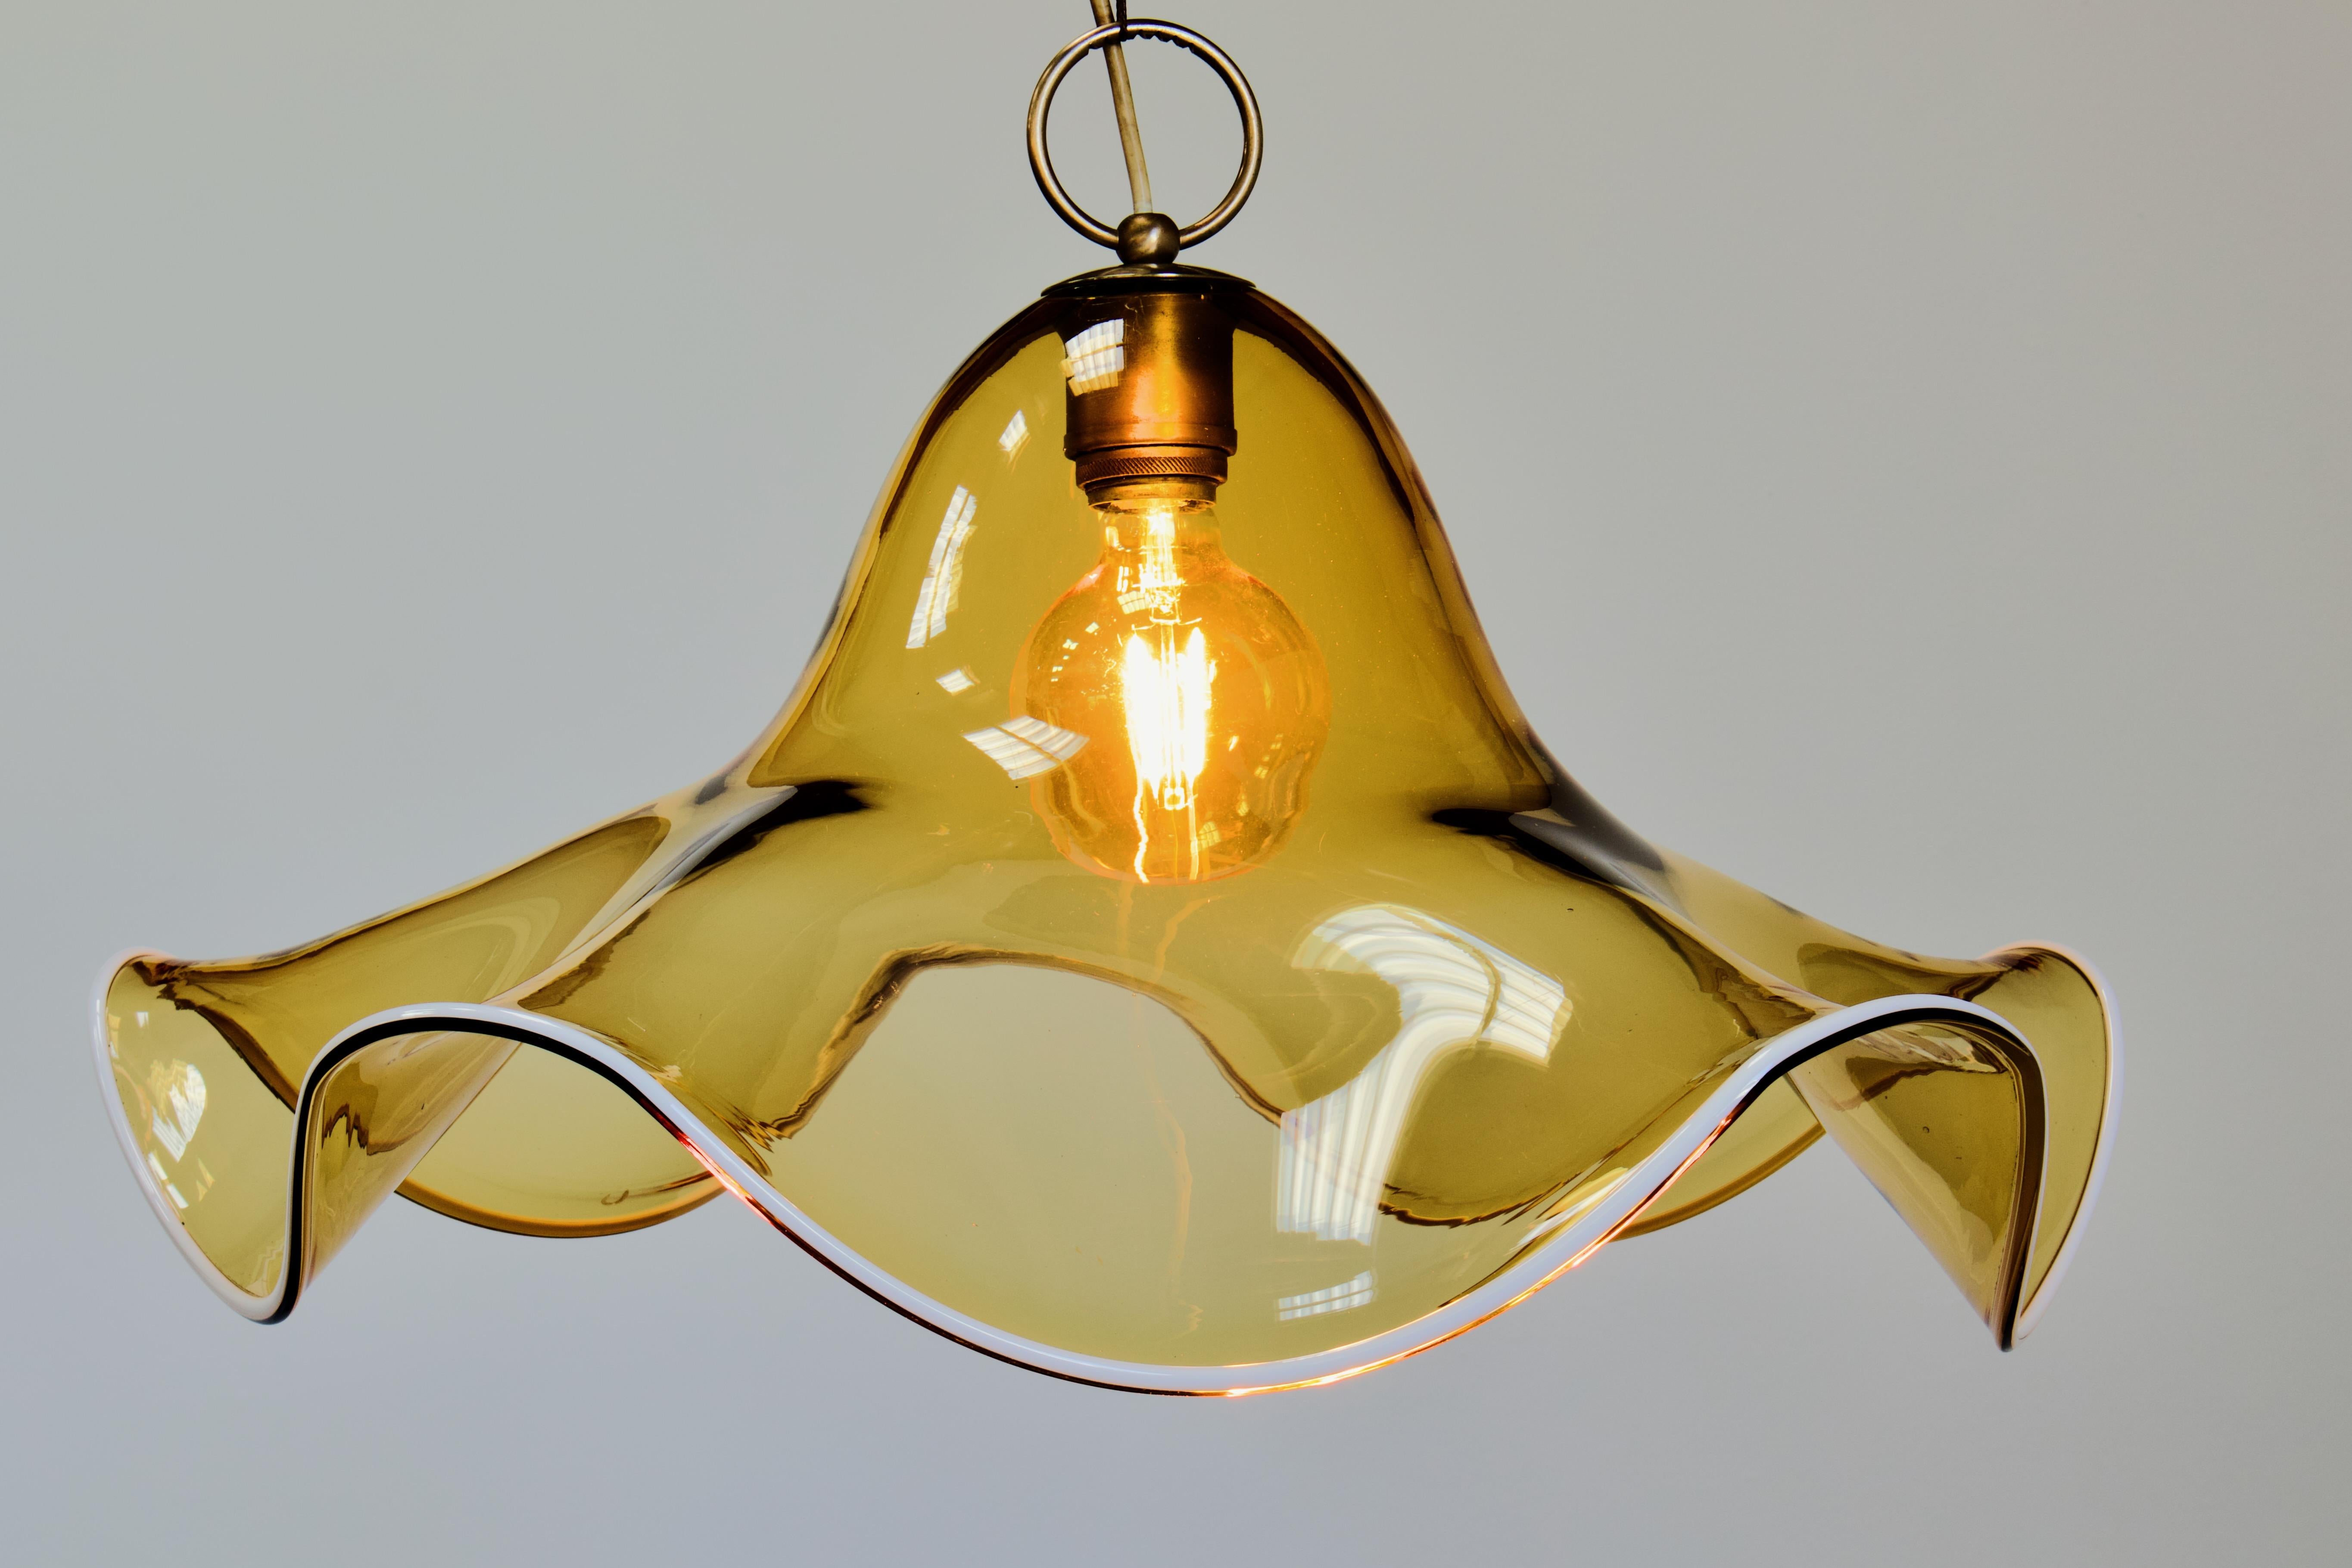 Organic Modern XL Floral Amber Murano Glass Pendant Lamp by La Murrina, 1970s Italy For Sale